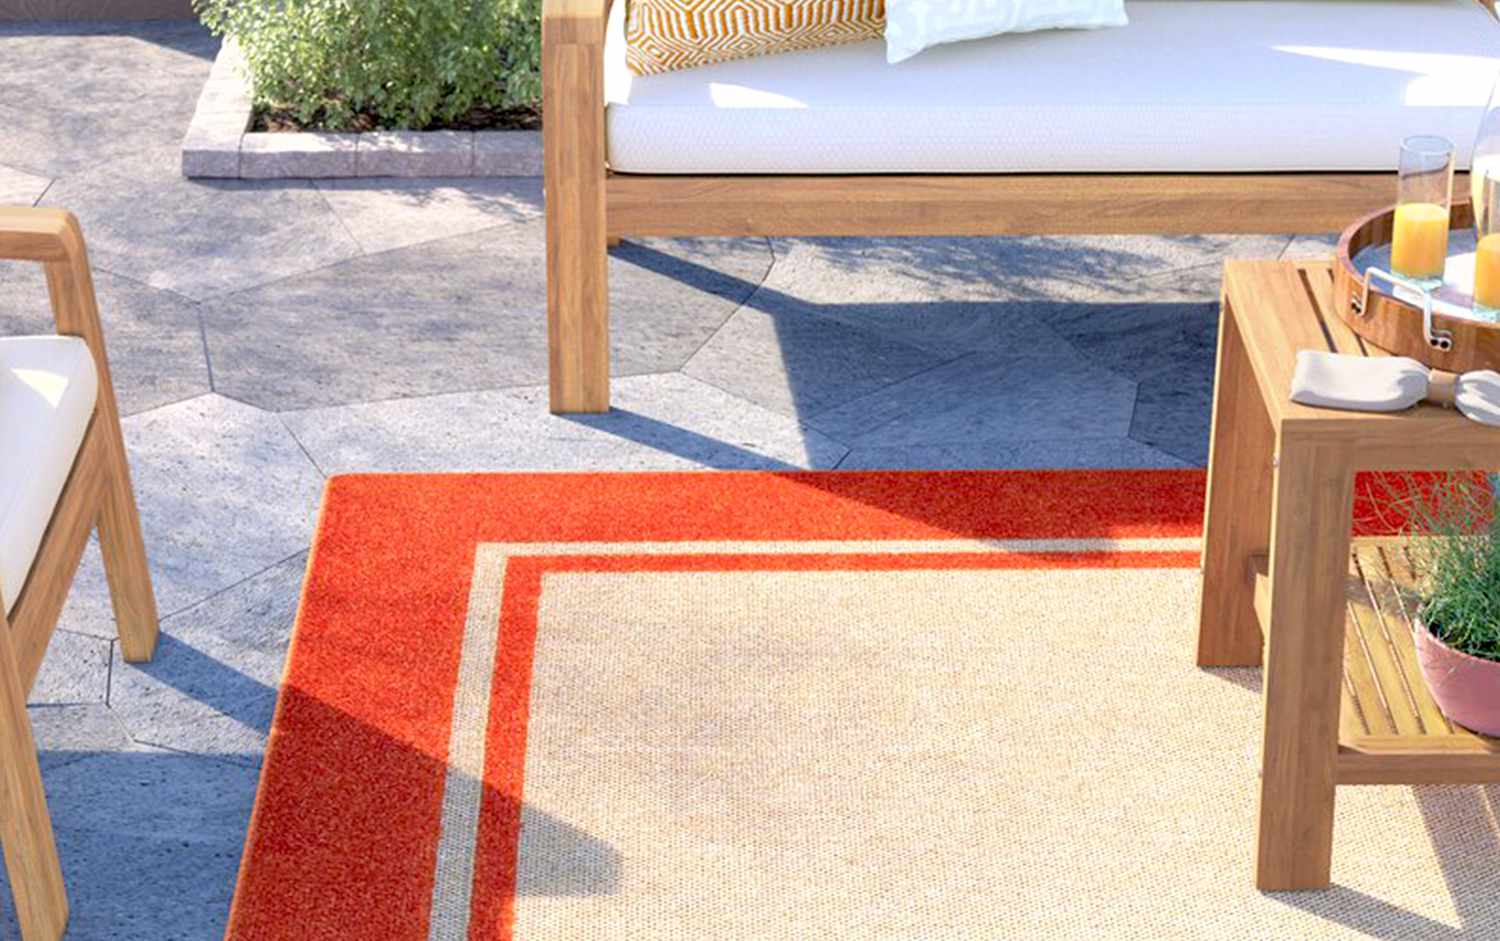 The 11 Best Outdoor Rugs According To, What Are The Best Outdoor Rugs Made Of Vinyl Flooring